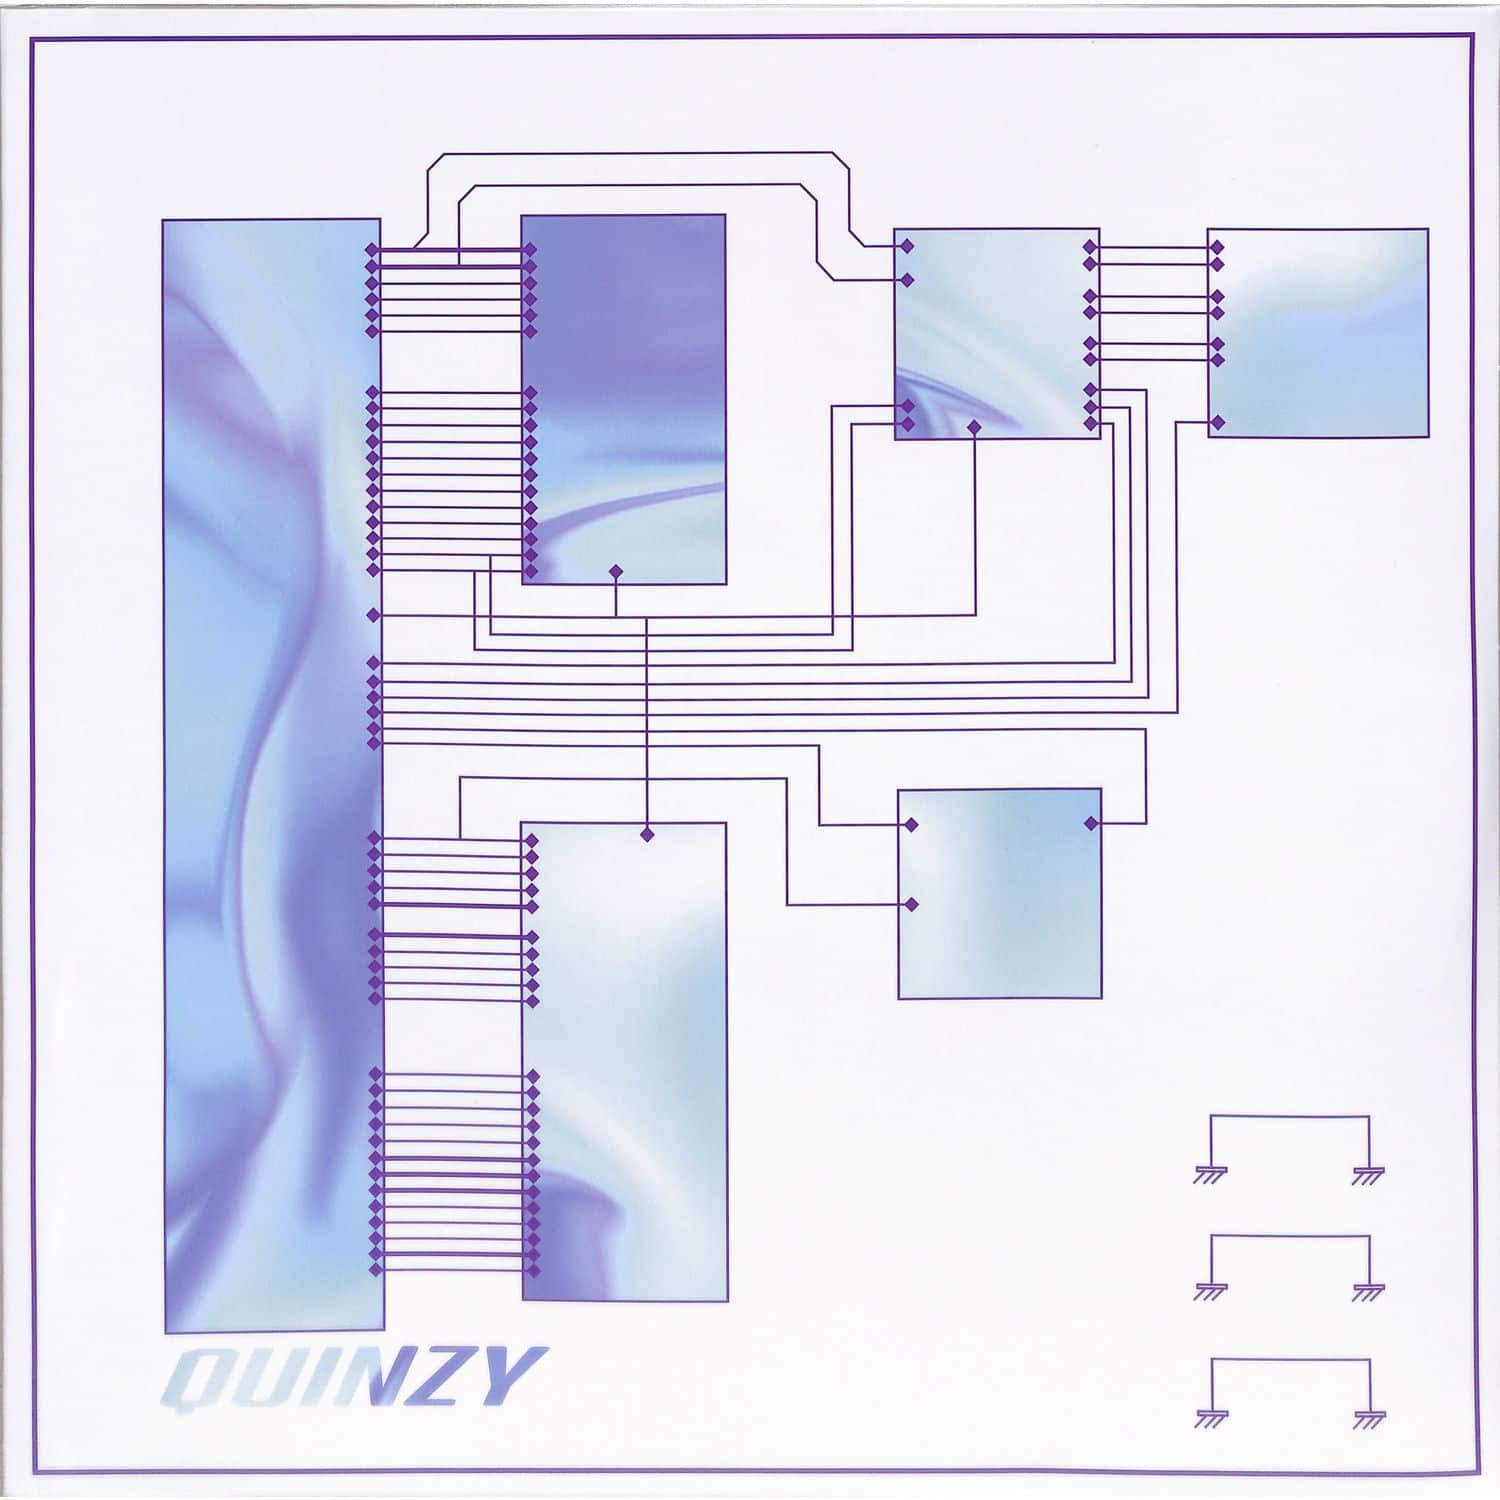 Quinzy - NOT ONLY HOUSE